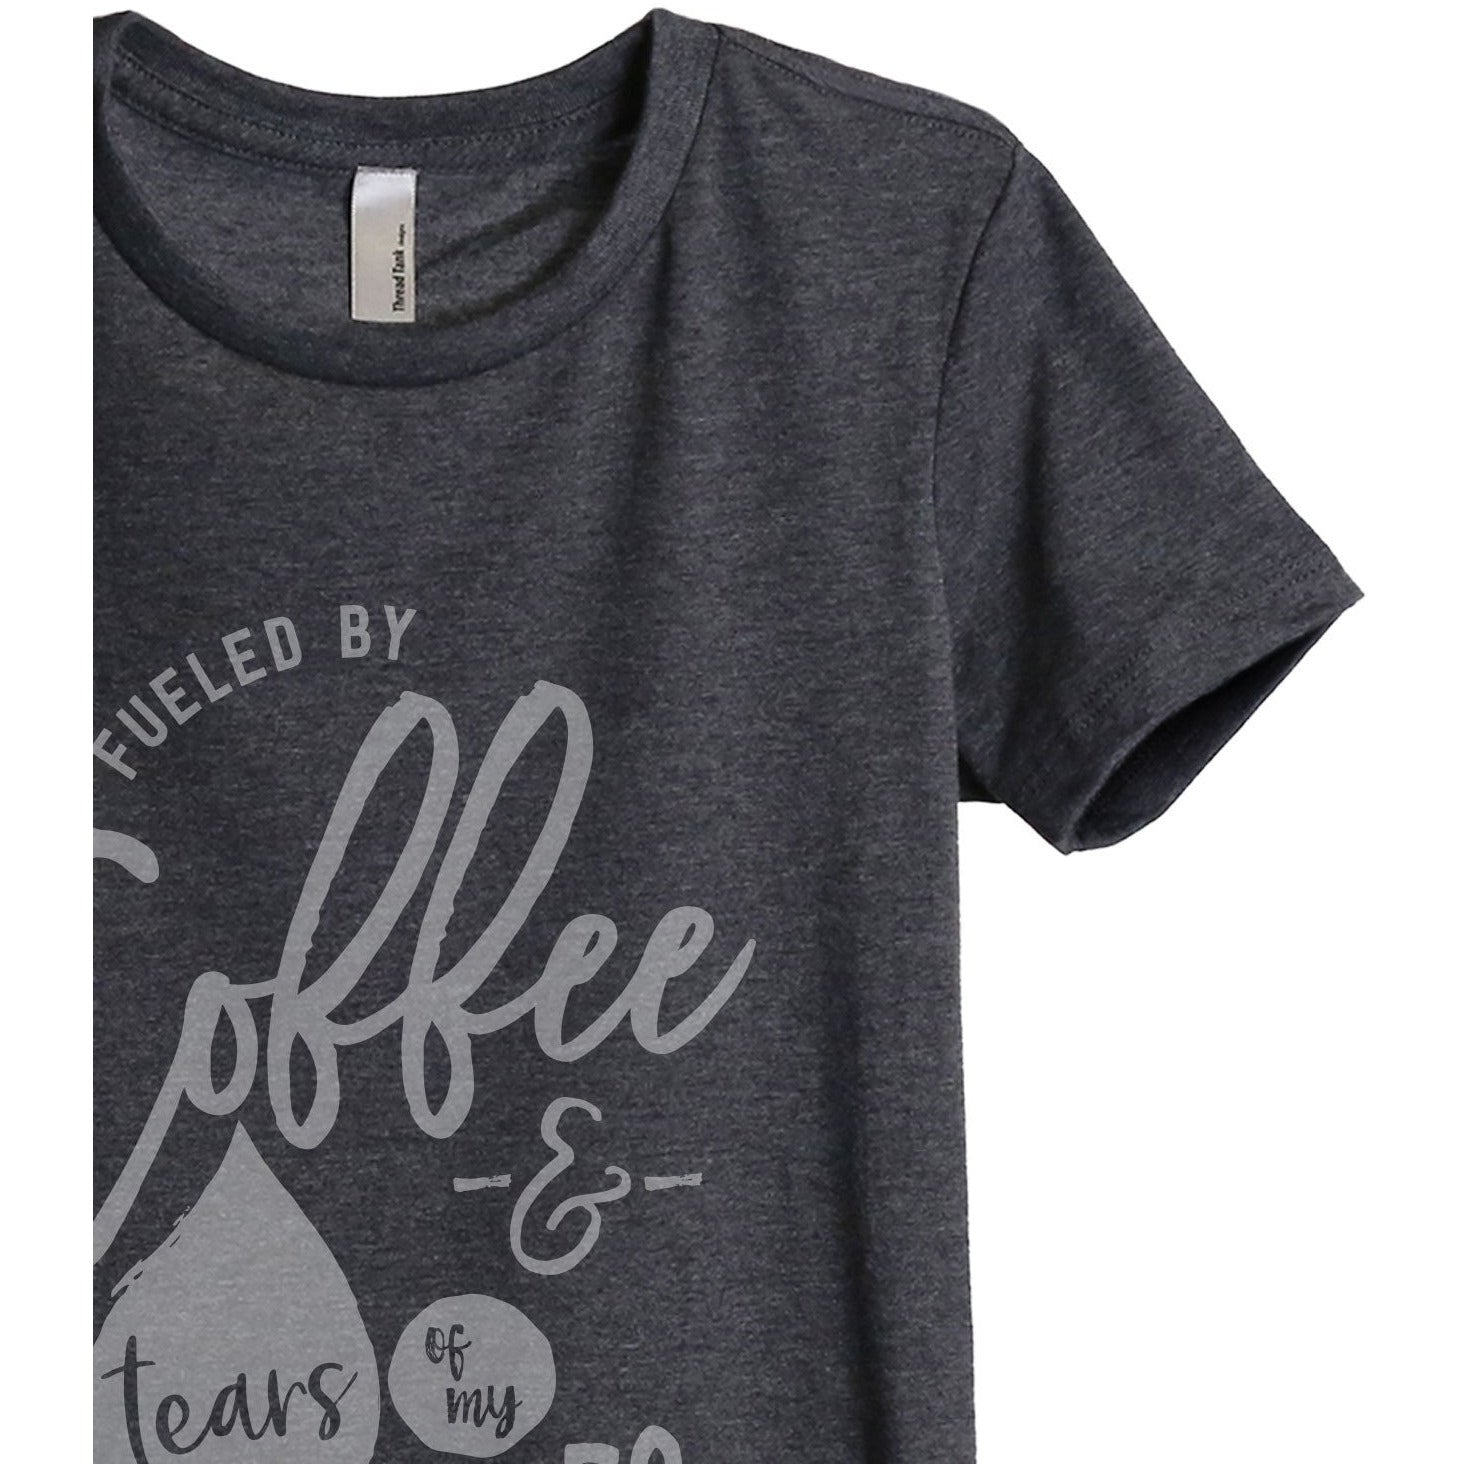 Fueled By Coffee And Tears Of My Enemies Women's Relaxed Crewneck T-Shirt Top Tee Charcoal Grey Zoom Details